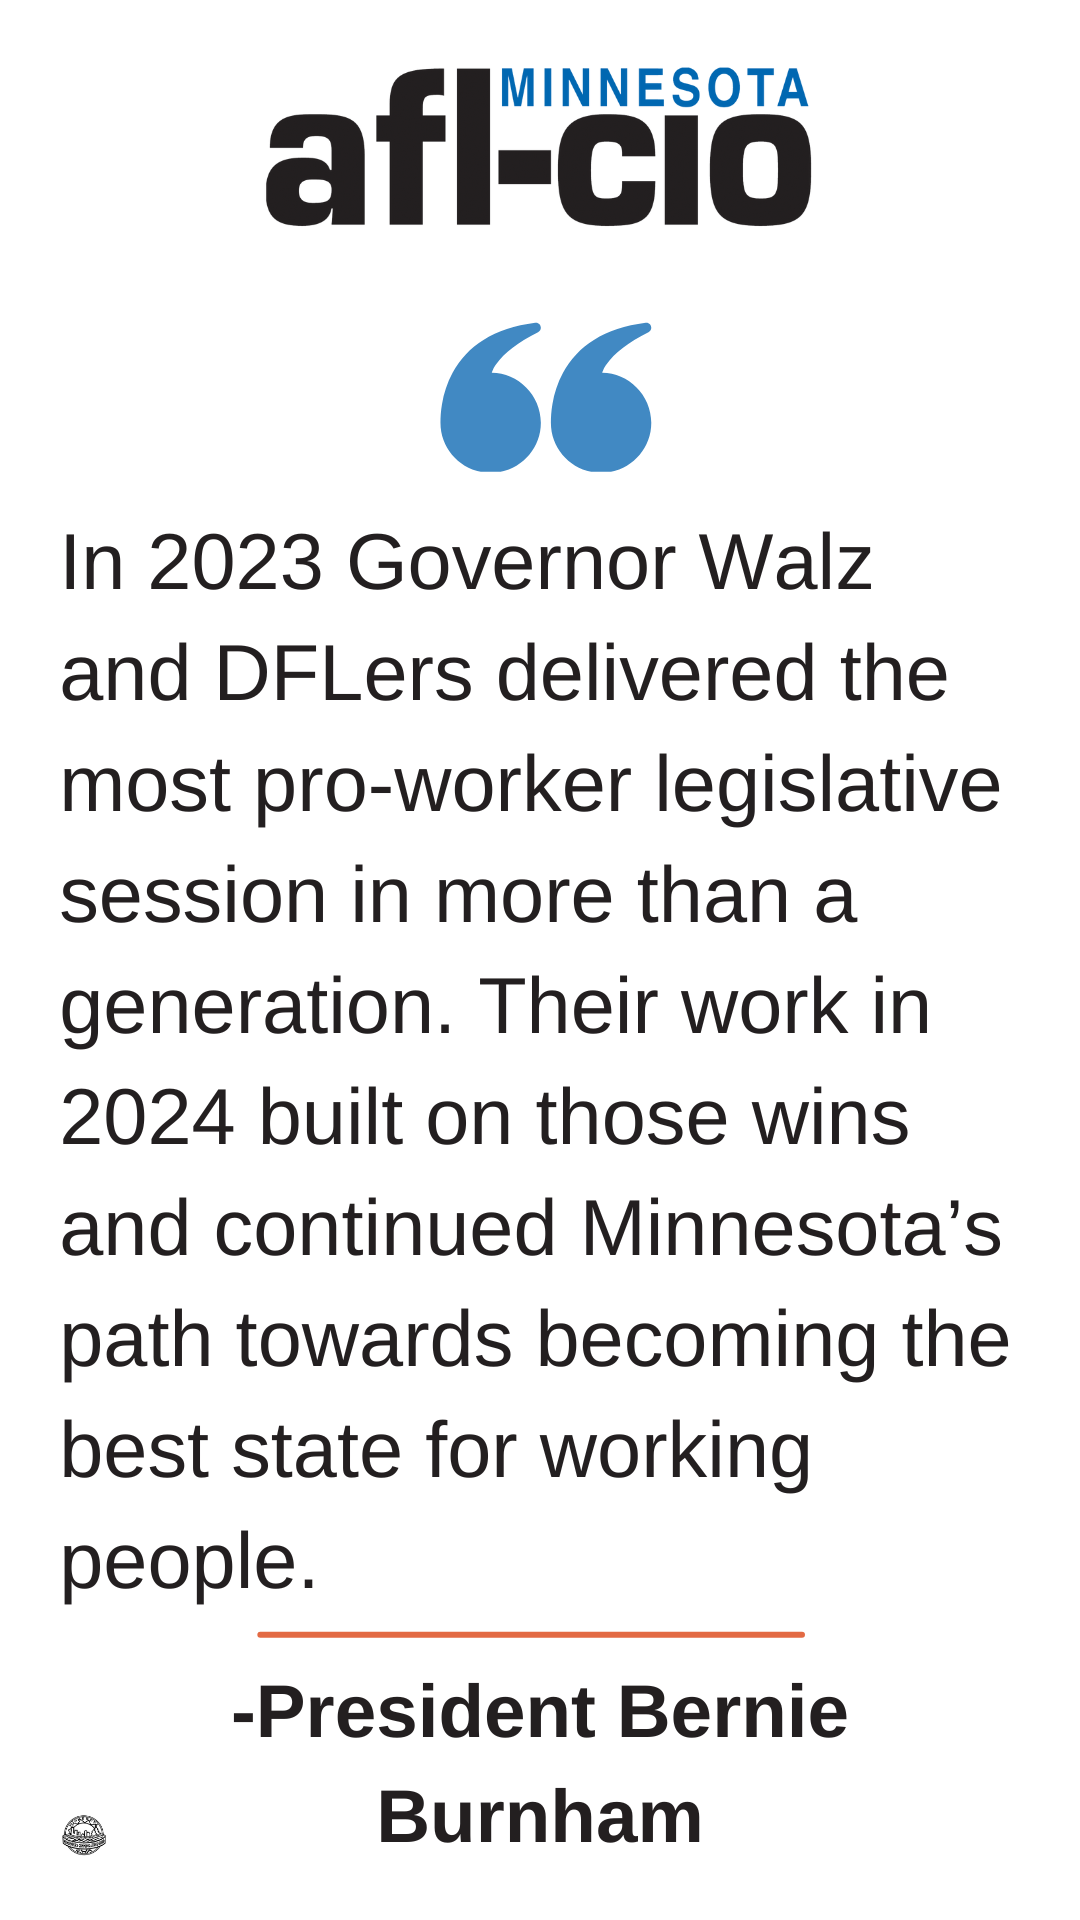 Minnesota AFL-CIO Logo on top of the image with a blue quotation mark below. Text that reads In 2023 Governor Walz and DFLers delivered the most pro-worker legislative session in more than a generation. Their work in 2024 built on those wins and continued Minnesota's path towards becoming the best state for working people. -President Bernie Burnham